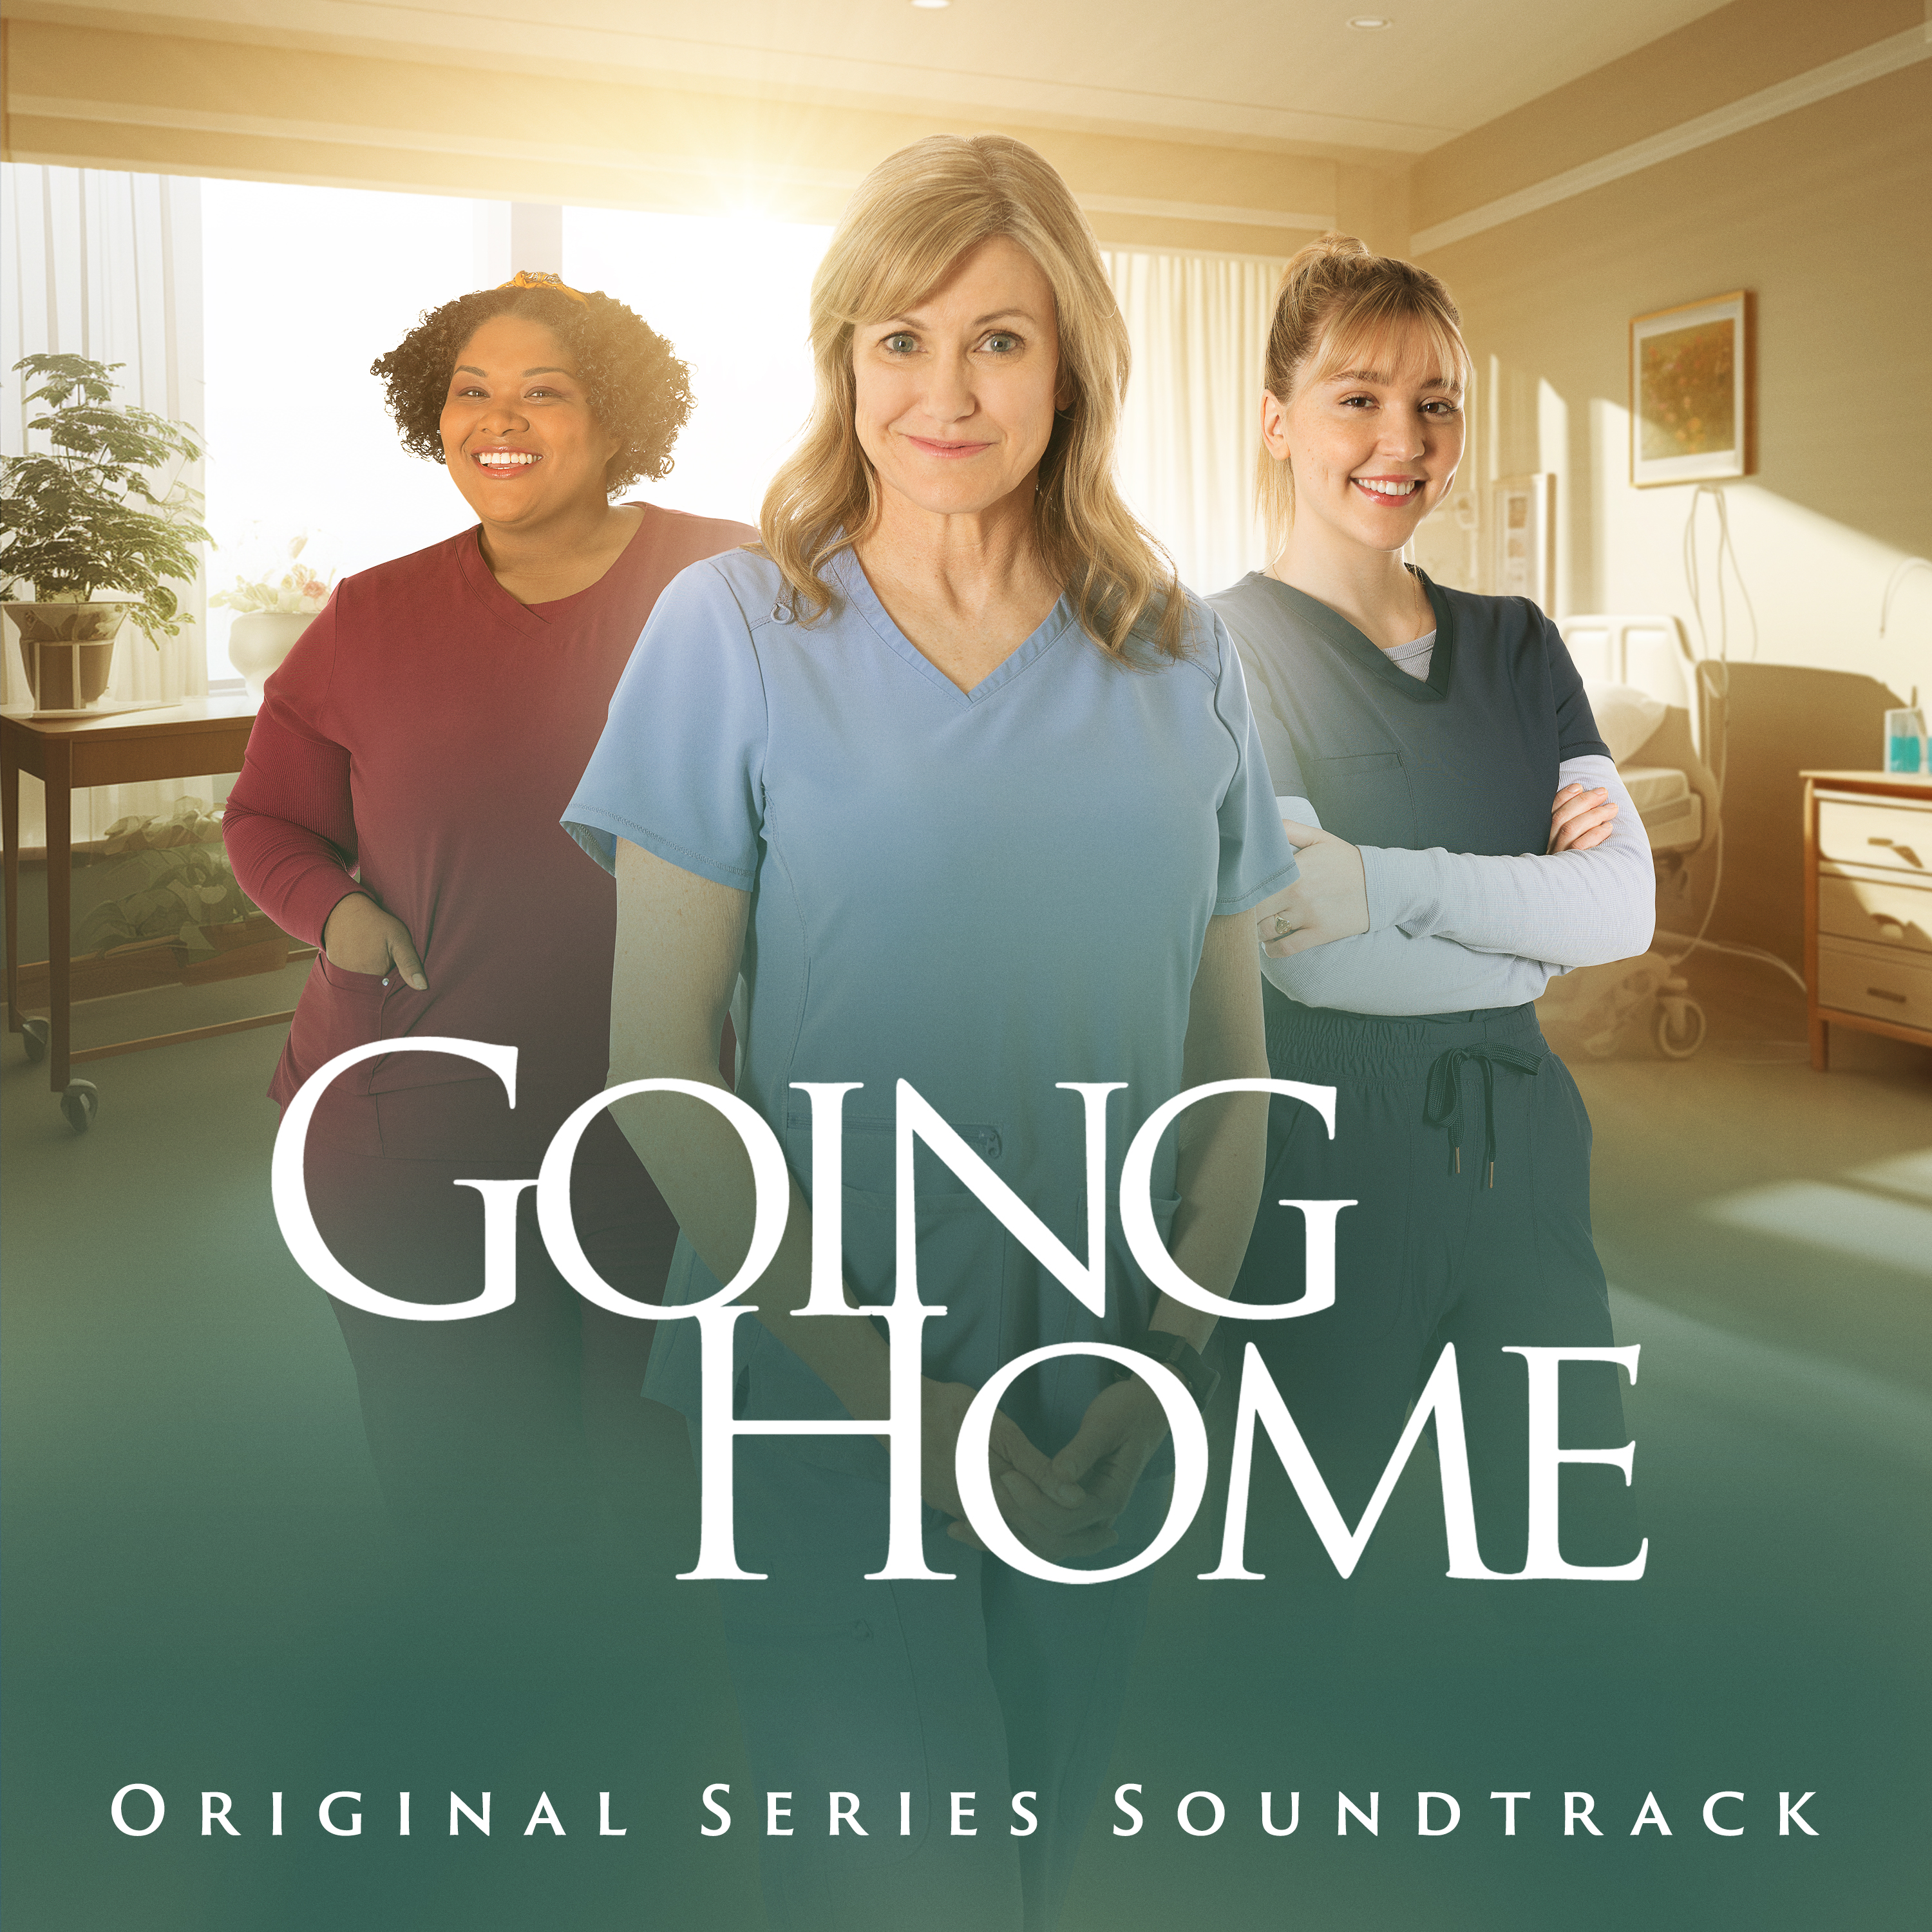 Going Home Original Series Soundtrack Features Original Songs and Score from the Beloved Series